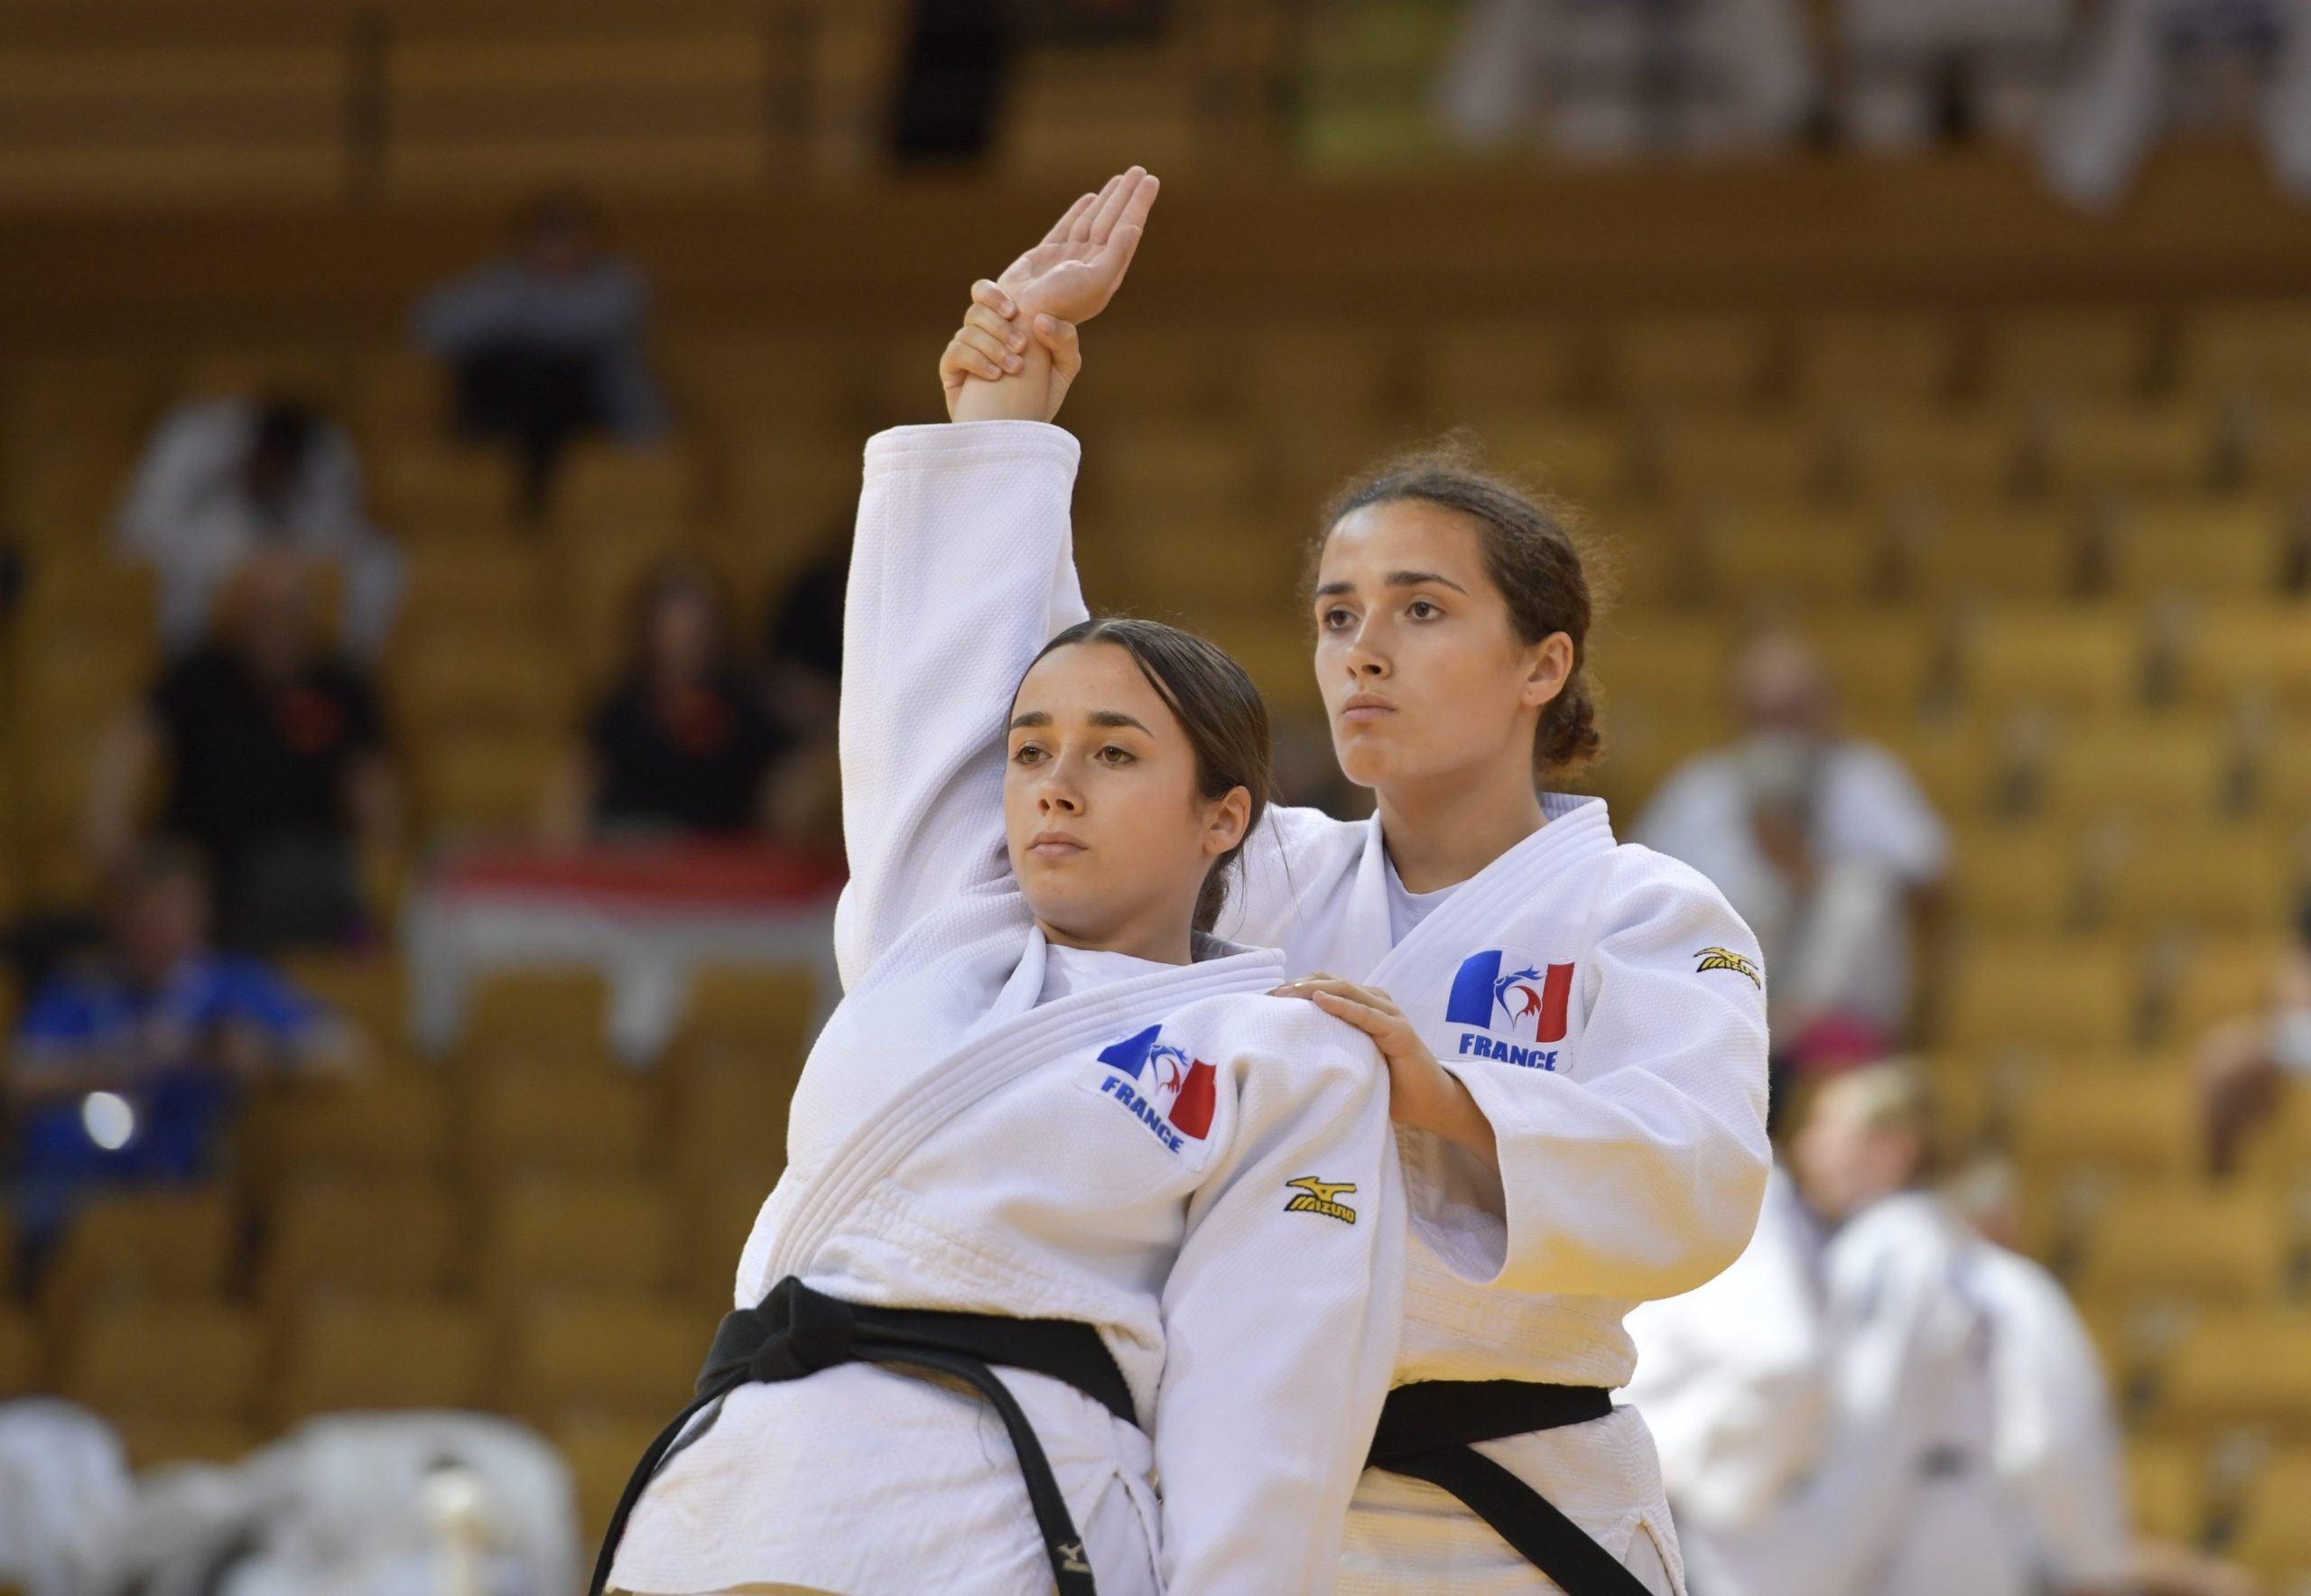 13 NATIONS ADVANCE TO THE FINALS AT THE EUROPEAN KATA CHAMPIONSHIPS